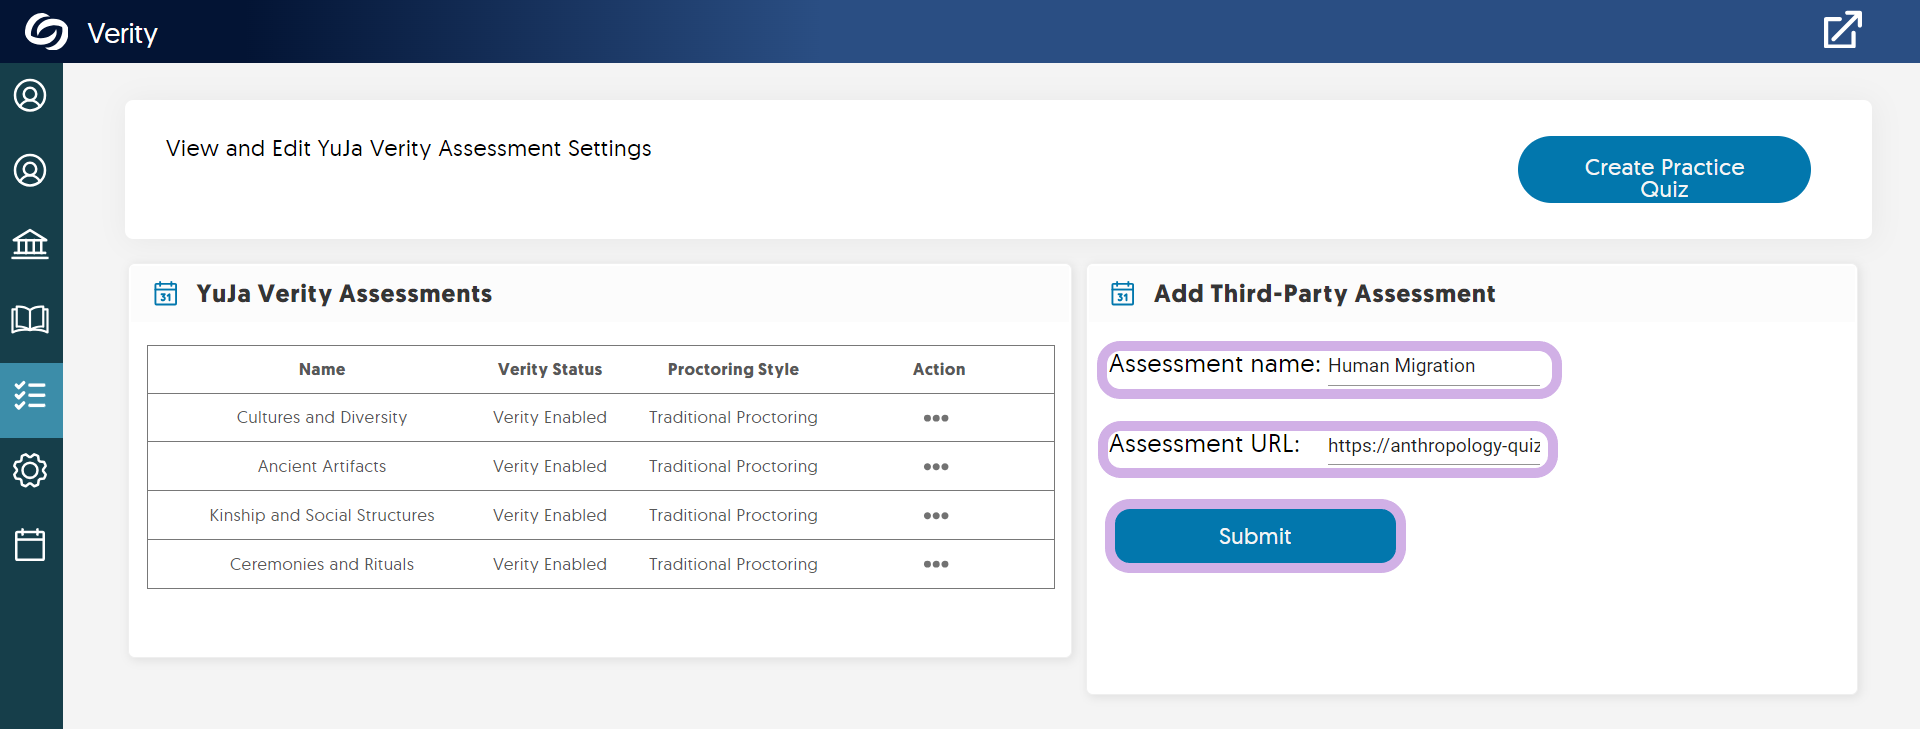 The Add Third-Party Assessment panel features a name and url for an assessment.